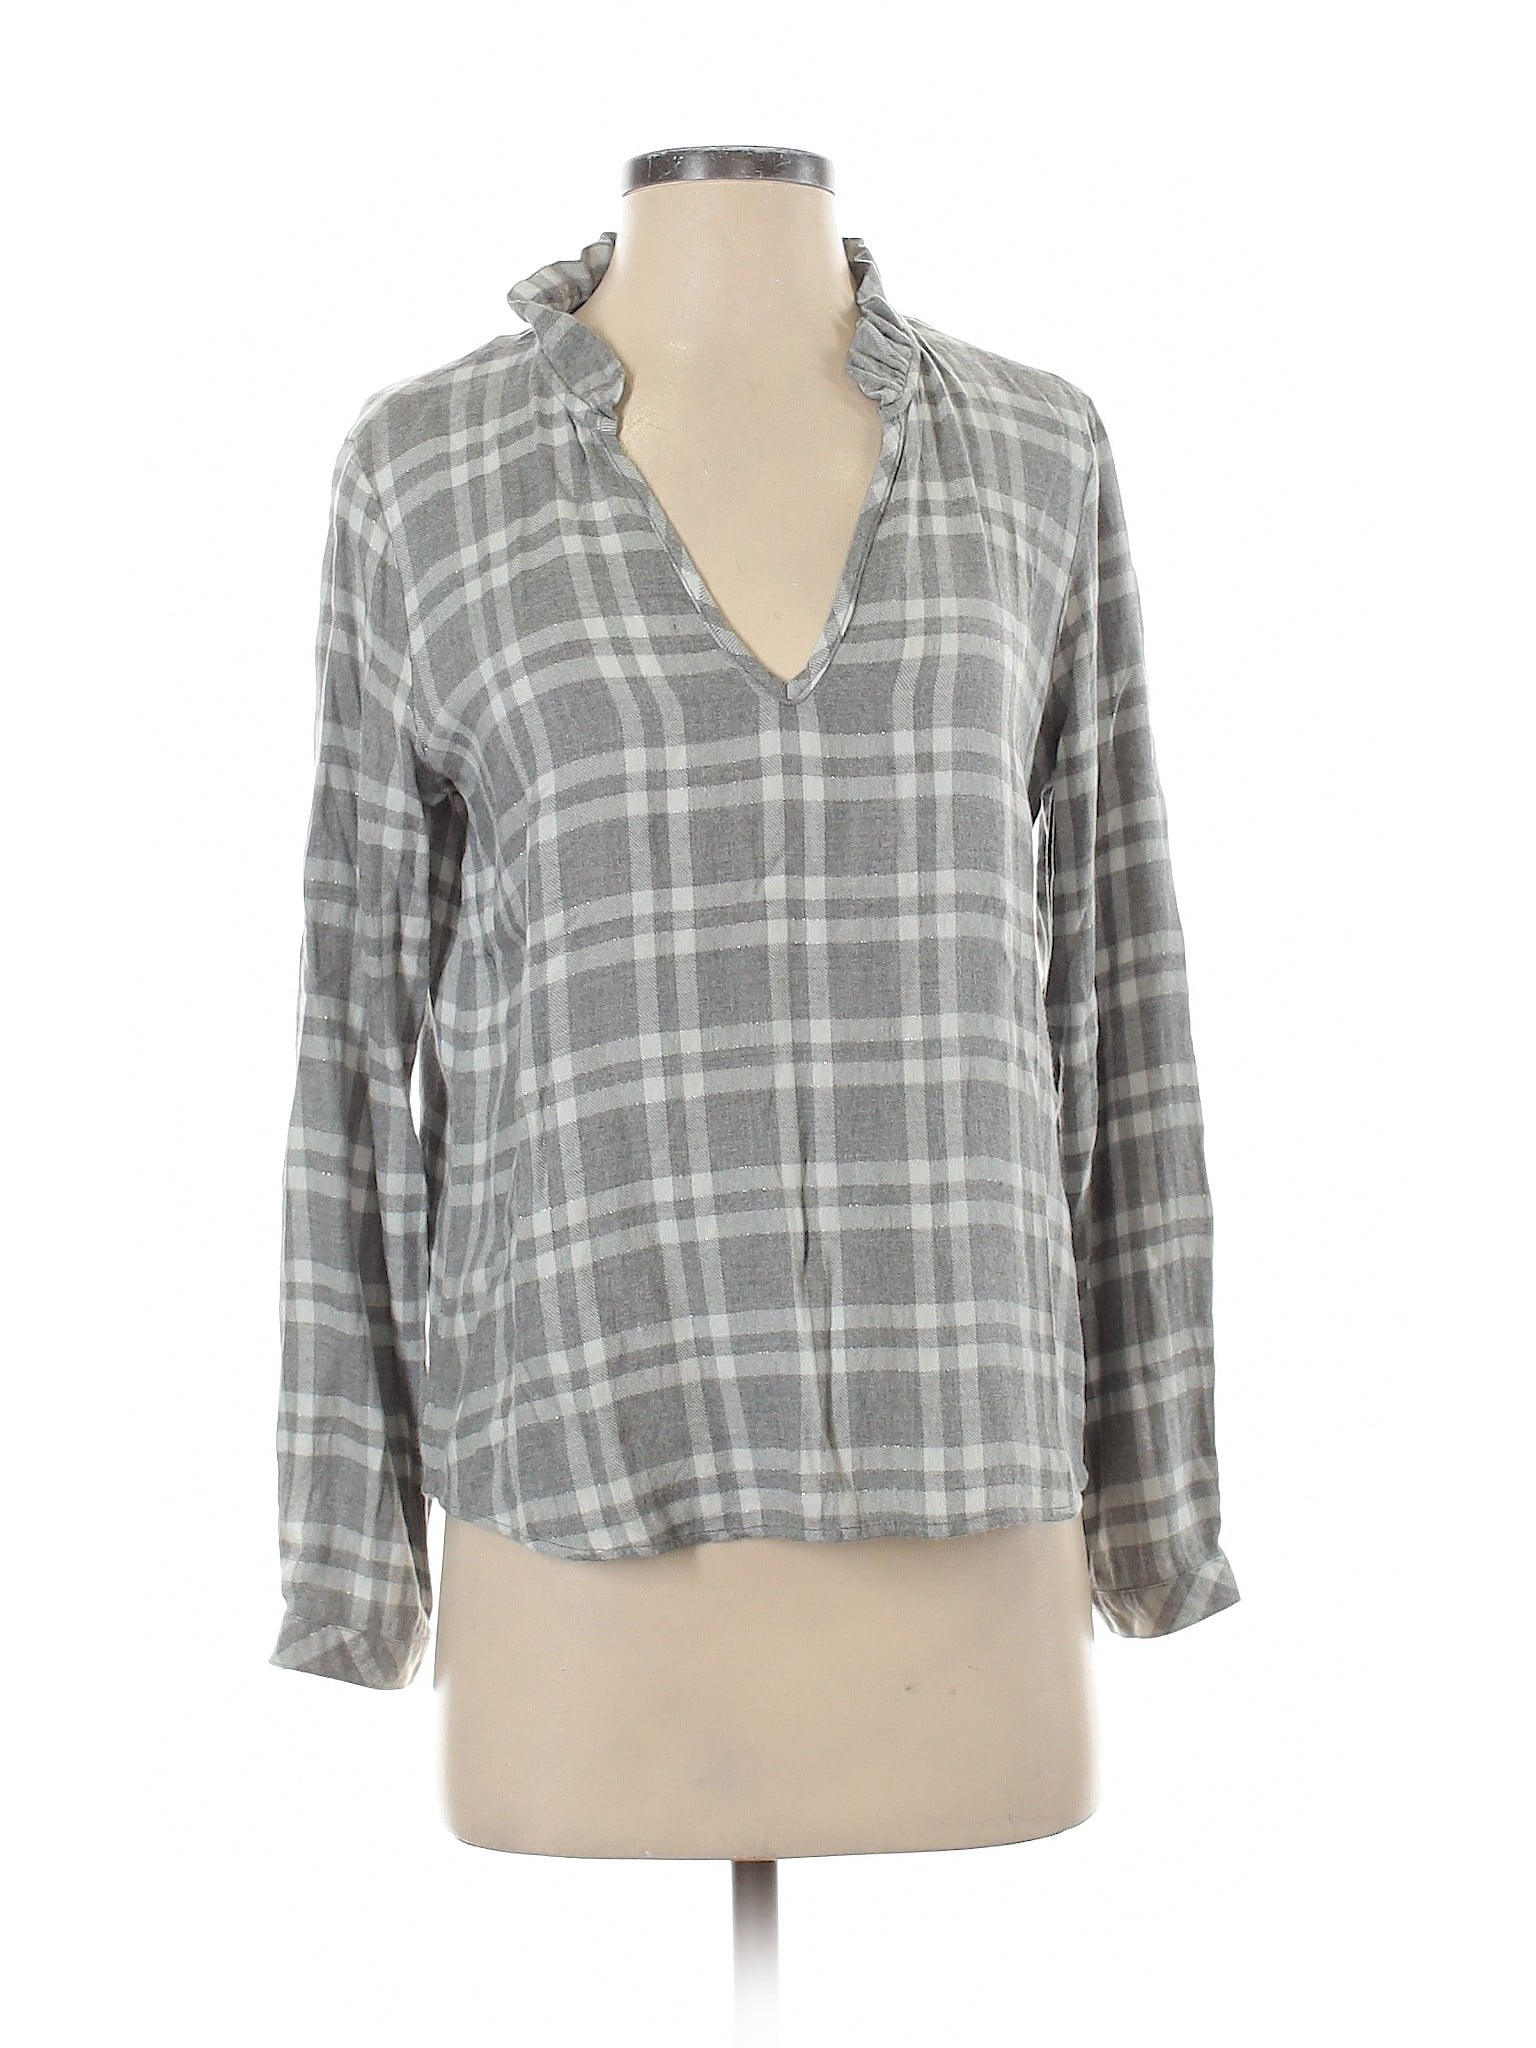 Cloth & Stone - Pre-Owned Cloth & Stone Women's Size XS Long Sleeve ...